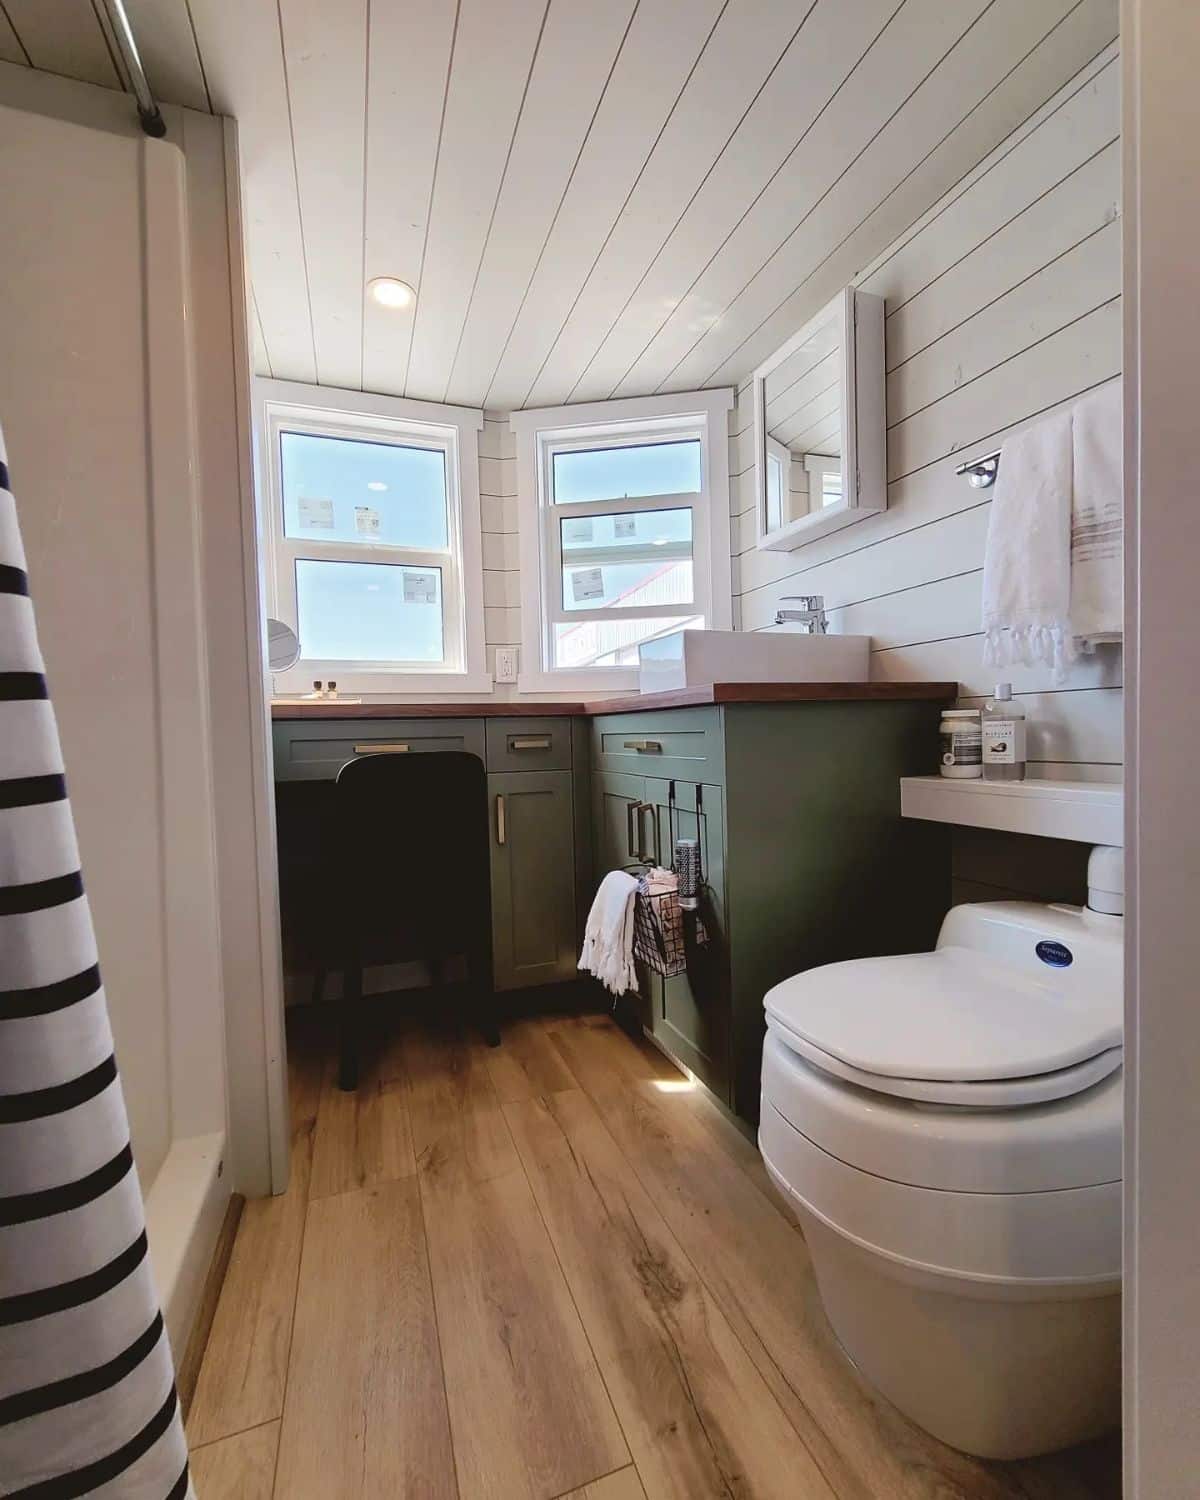 Bathroom area has a standard toilet, sink with vanity and separate shower